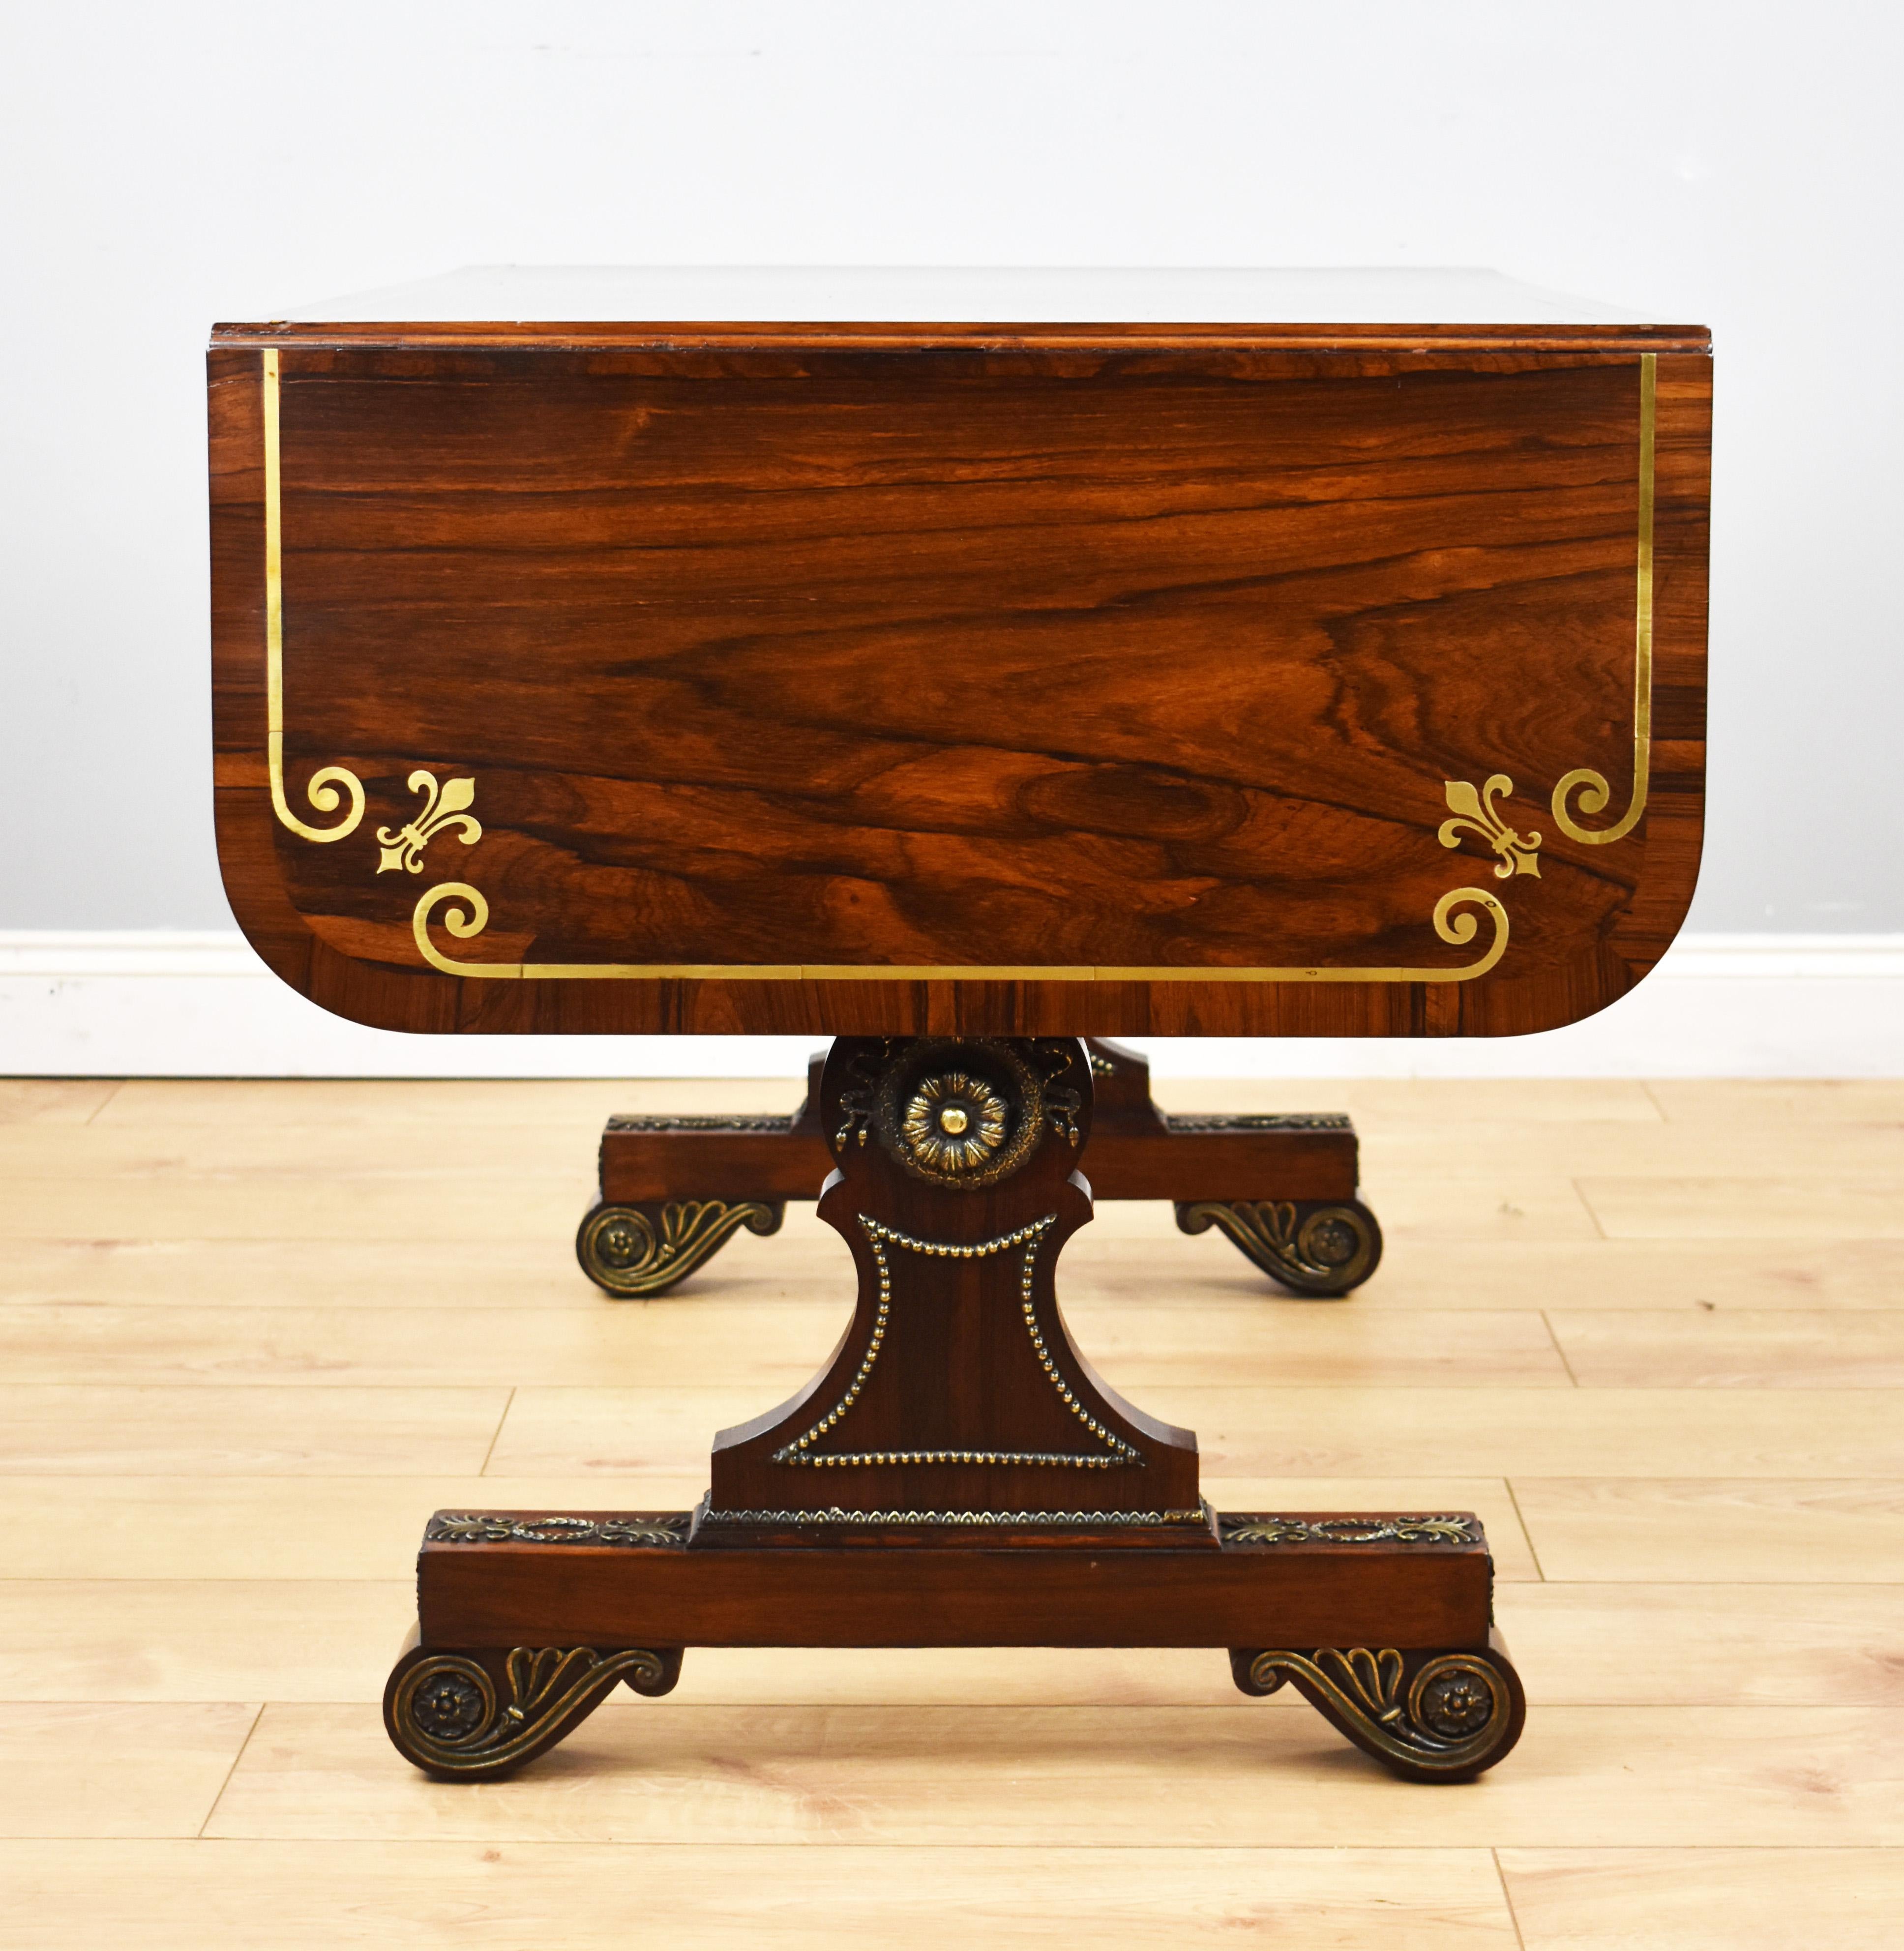 19th Century English Regency Period Rosewood and Brass Inlaid Sofa Table 3